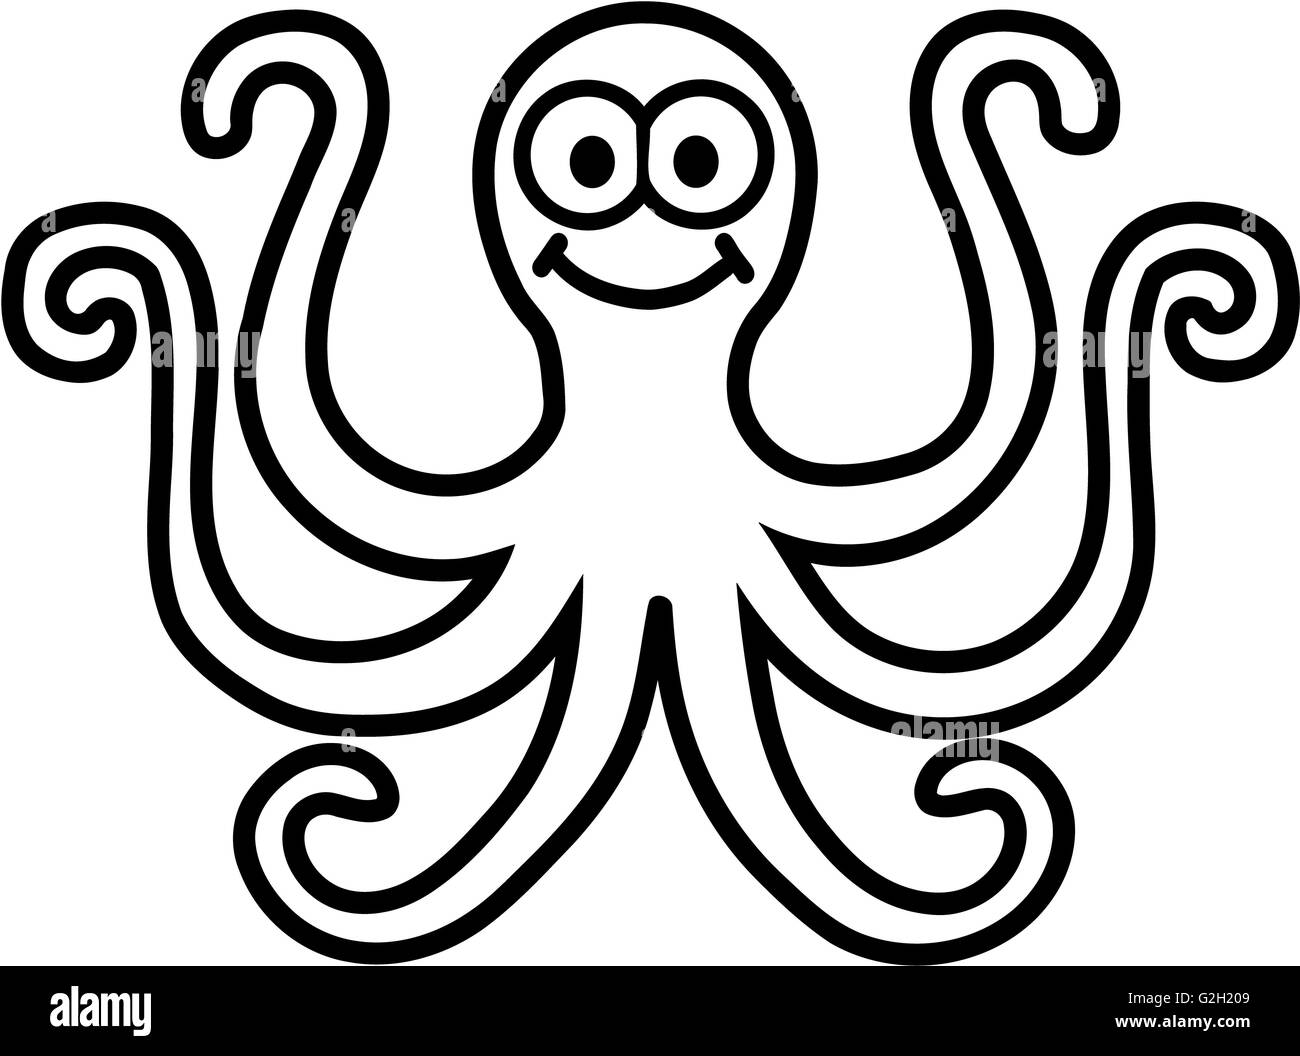 Octopus cartoon Black and White Stock Photos & Images - Alamy